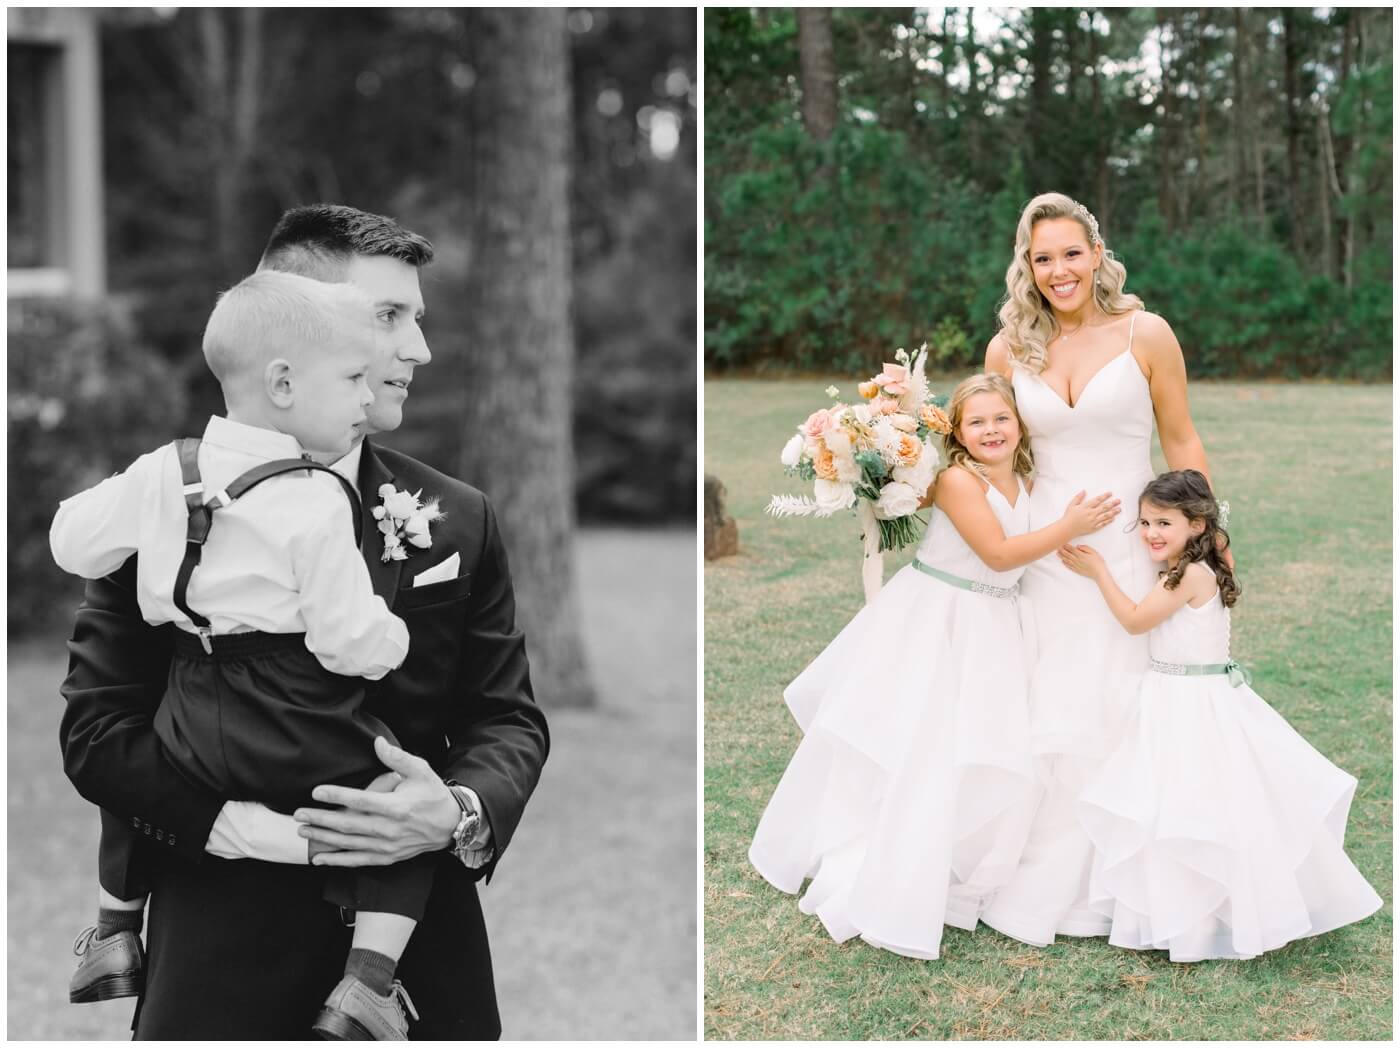 Houston Wedding at The Vine | the bride and groom with their flower girls and ring bearer